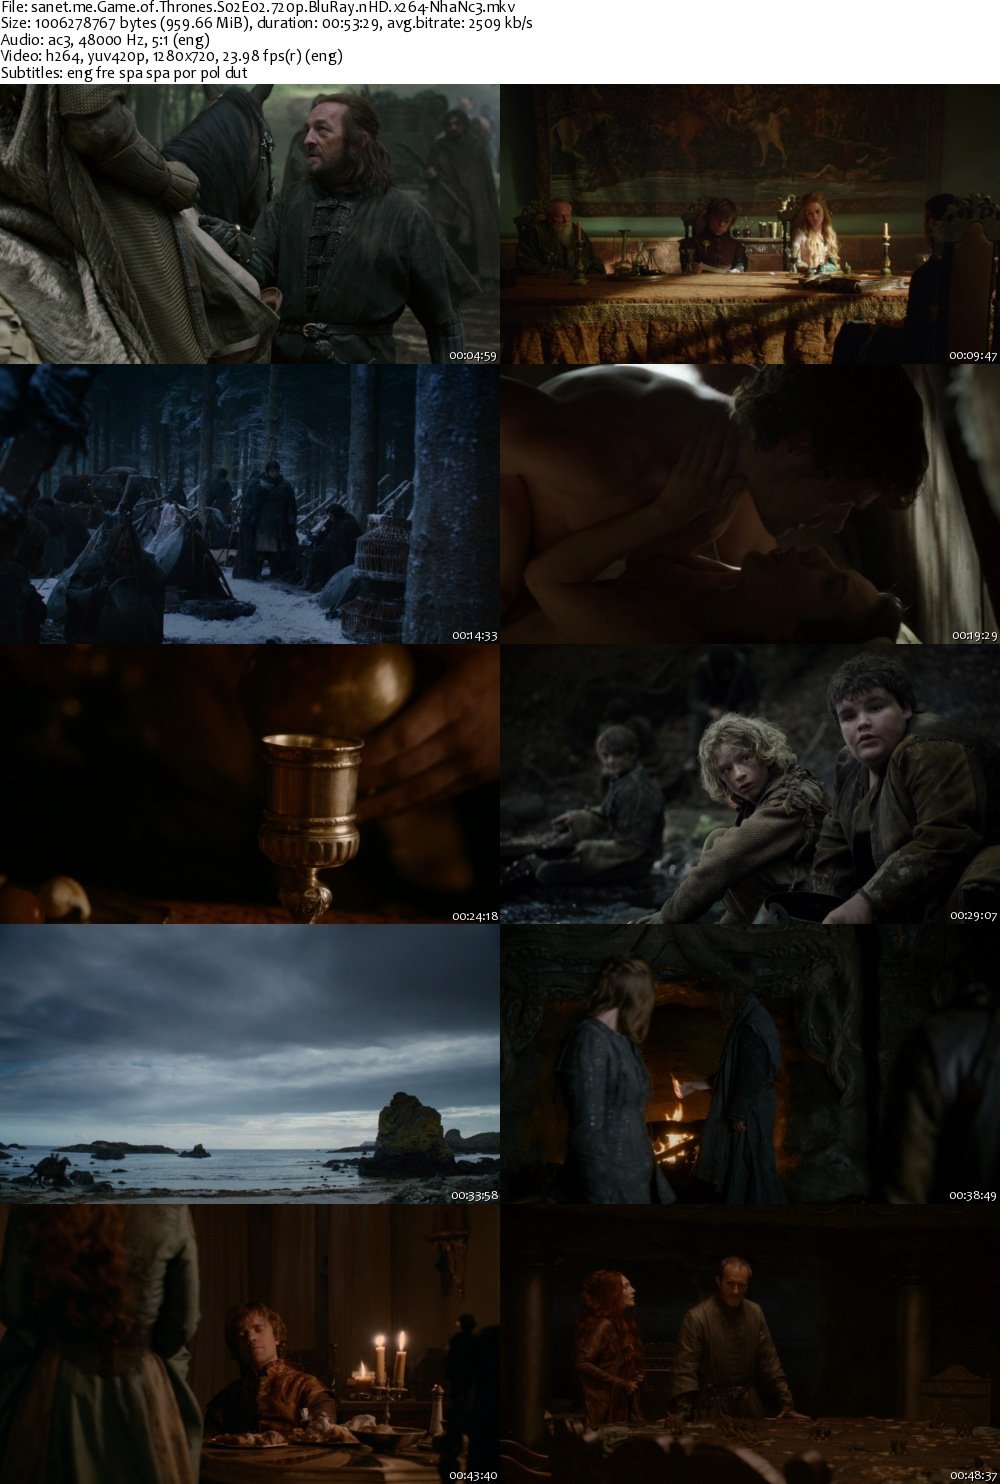 Game of Thrones - 1, 2, 3, 4, 5, 6, 7